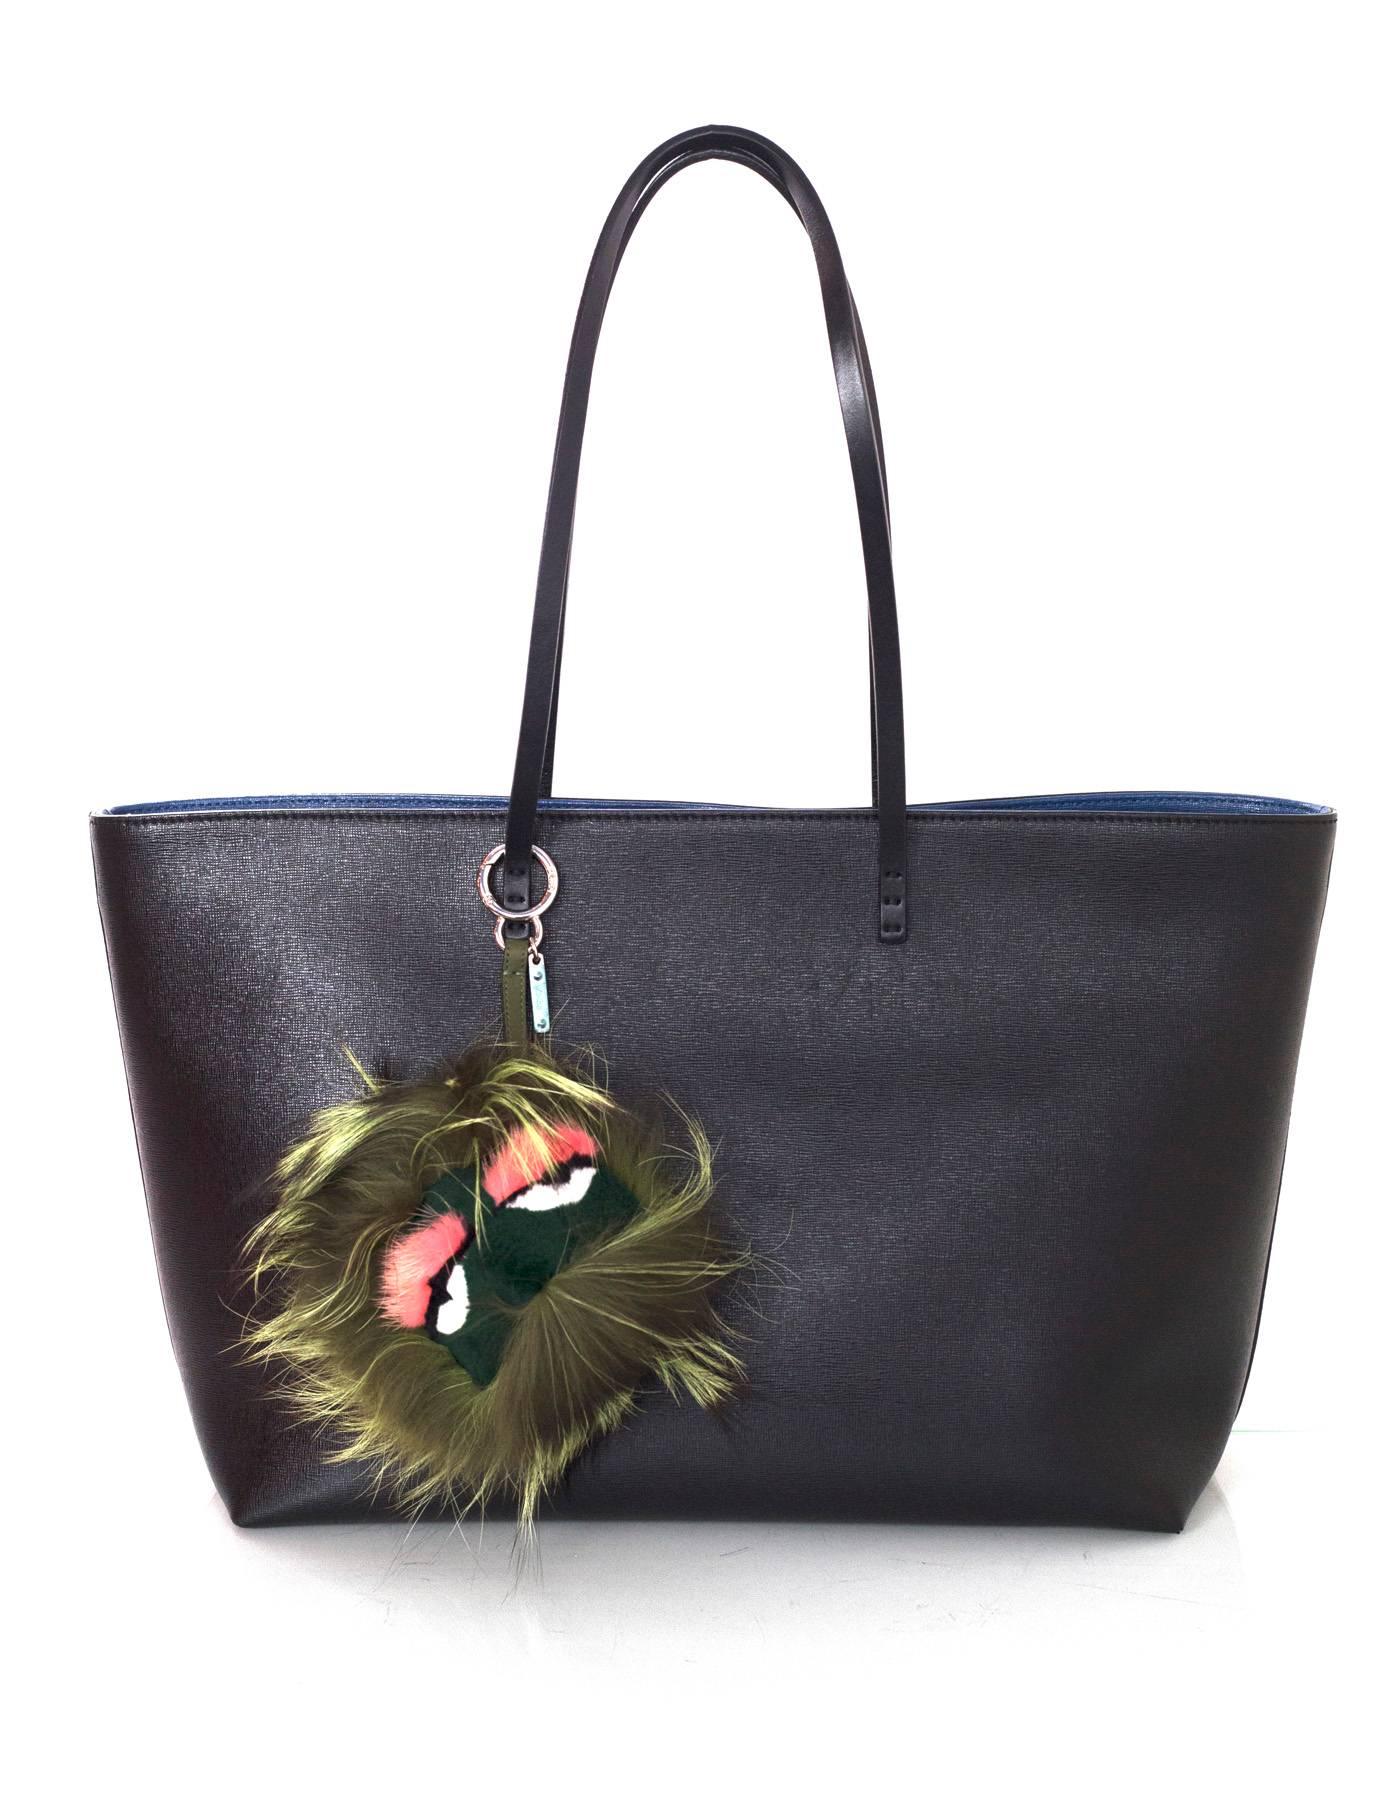 Fendi Green Mink & Fox Fur Bag Bug Charm 

Made In: Italy
Color: Green
Hardware: Silvertone
Materials: Fox, mink
Closure/Opening: Jump ring push lever
Retail Price: $850 + tax
Overall Condition: Excellent
Includes: Fendi box and dust